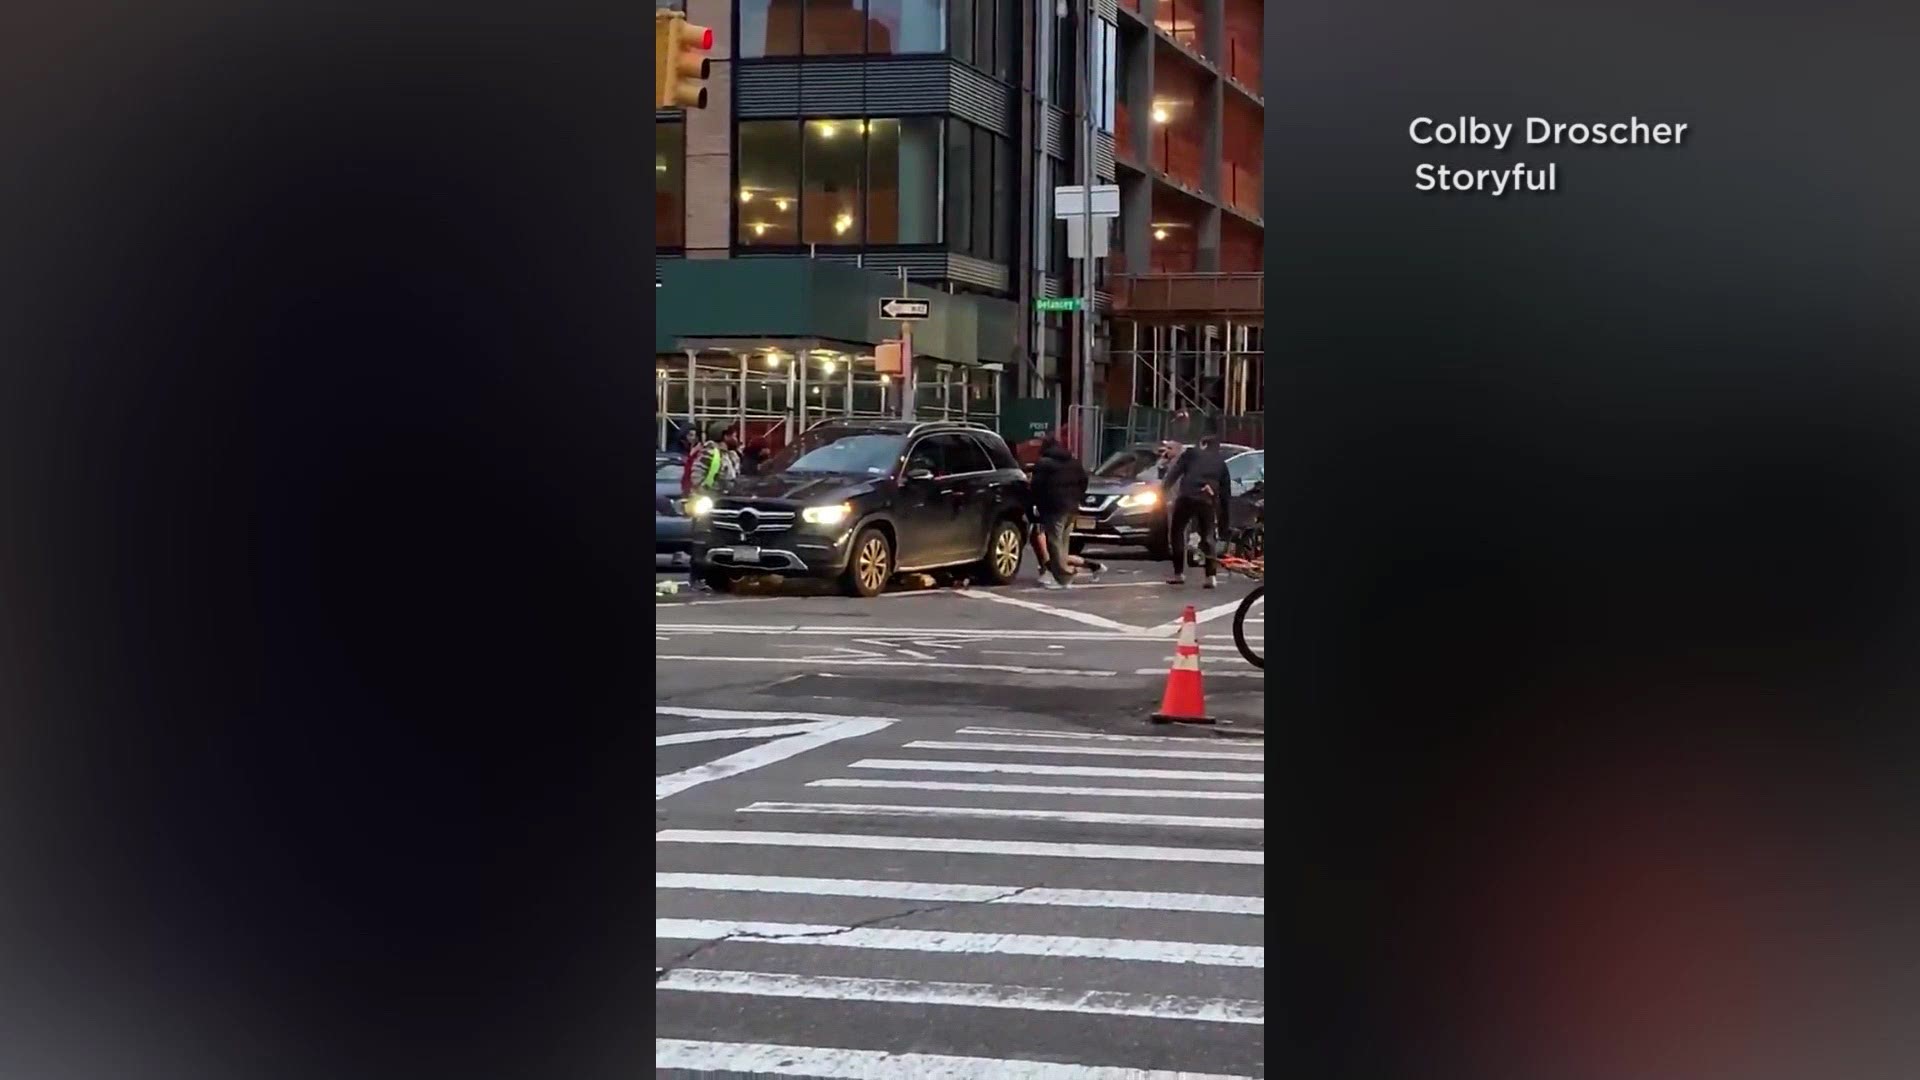 A pedestrian accident left a woman trapped underneath an SUV in New York City. Video shows several people banding together to lift the vehicle and free her.